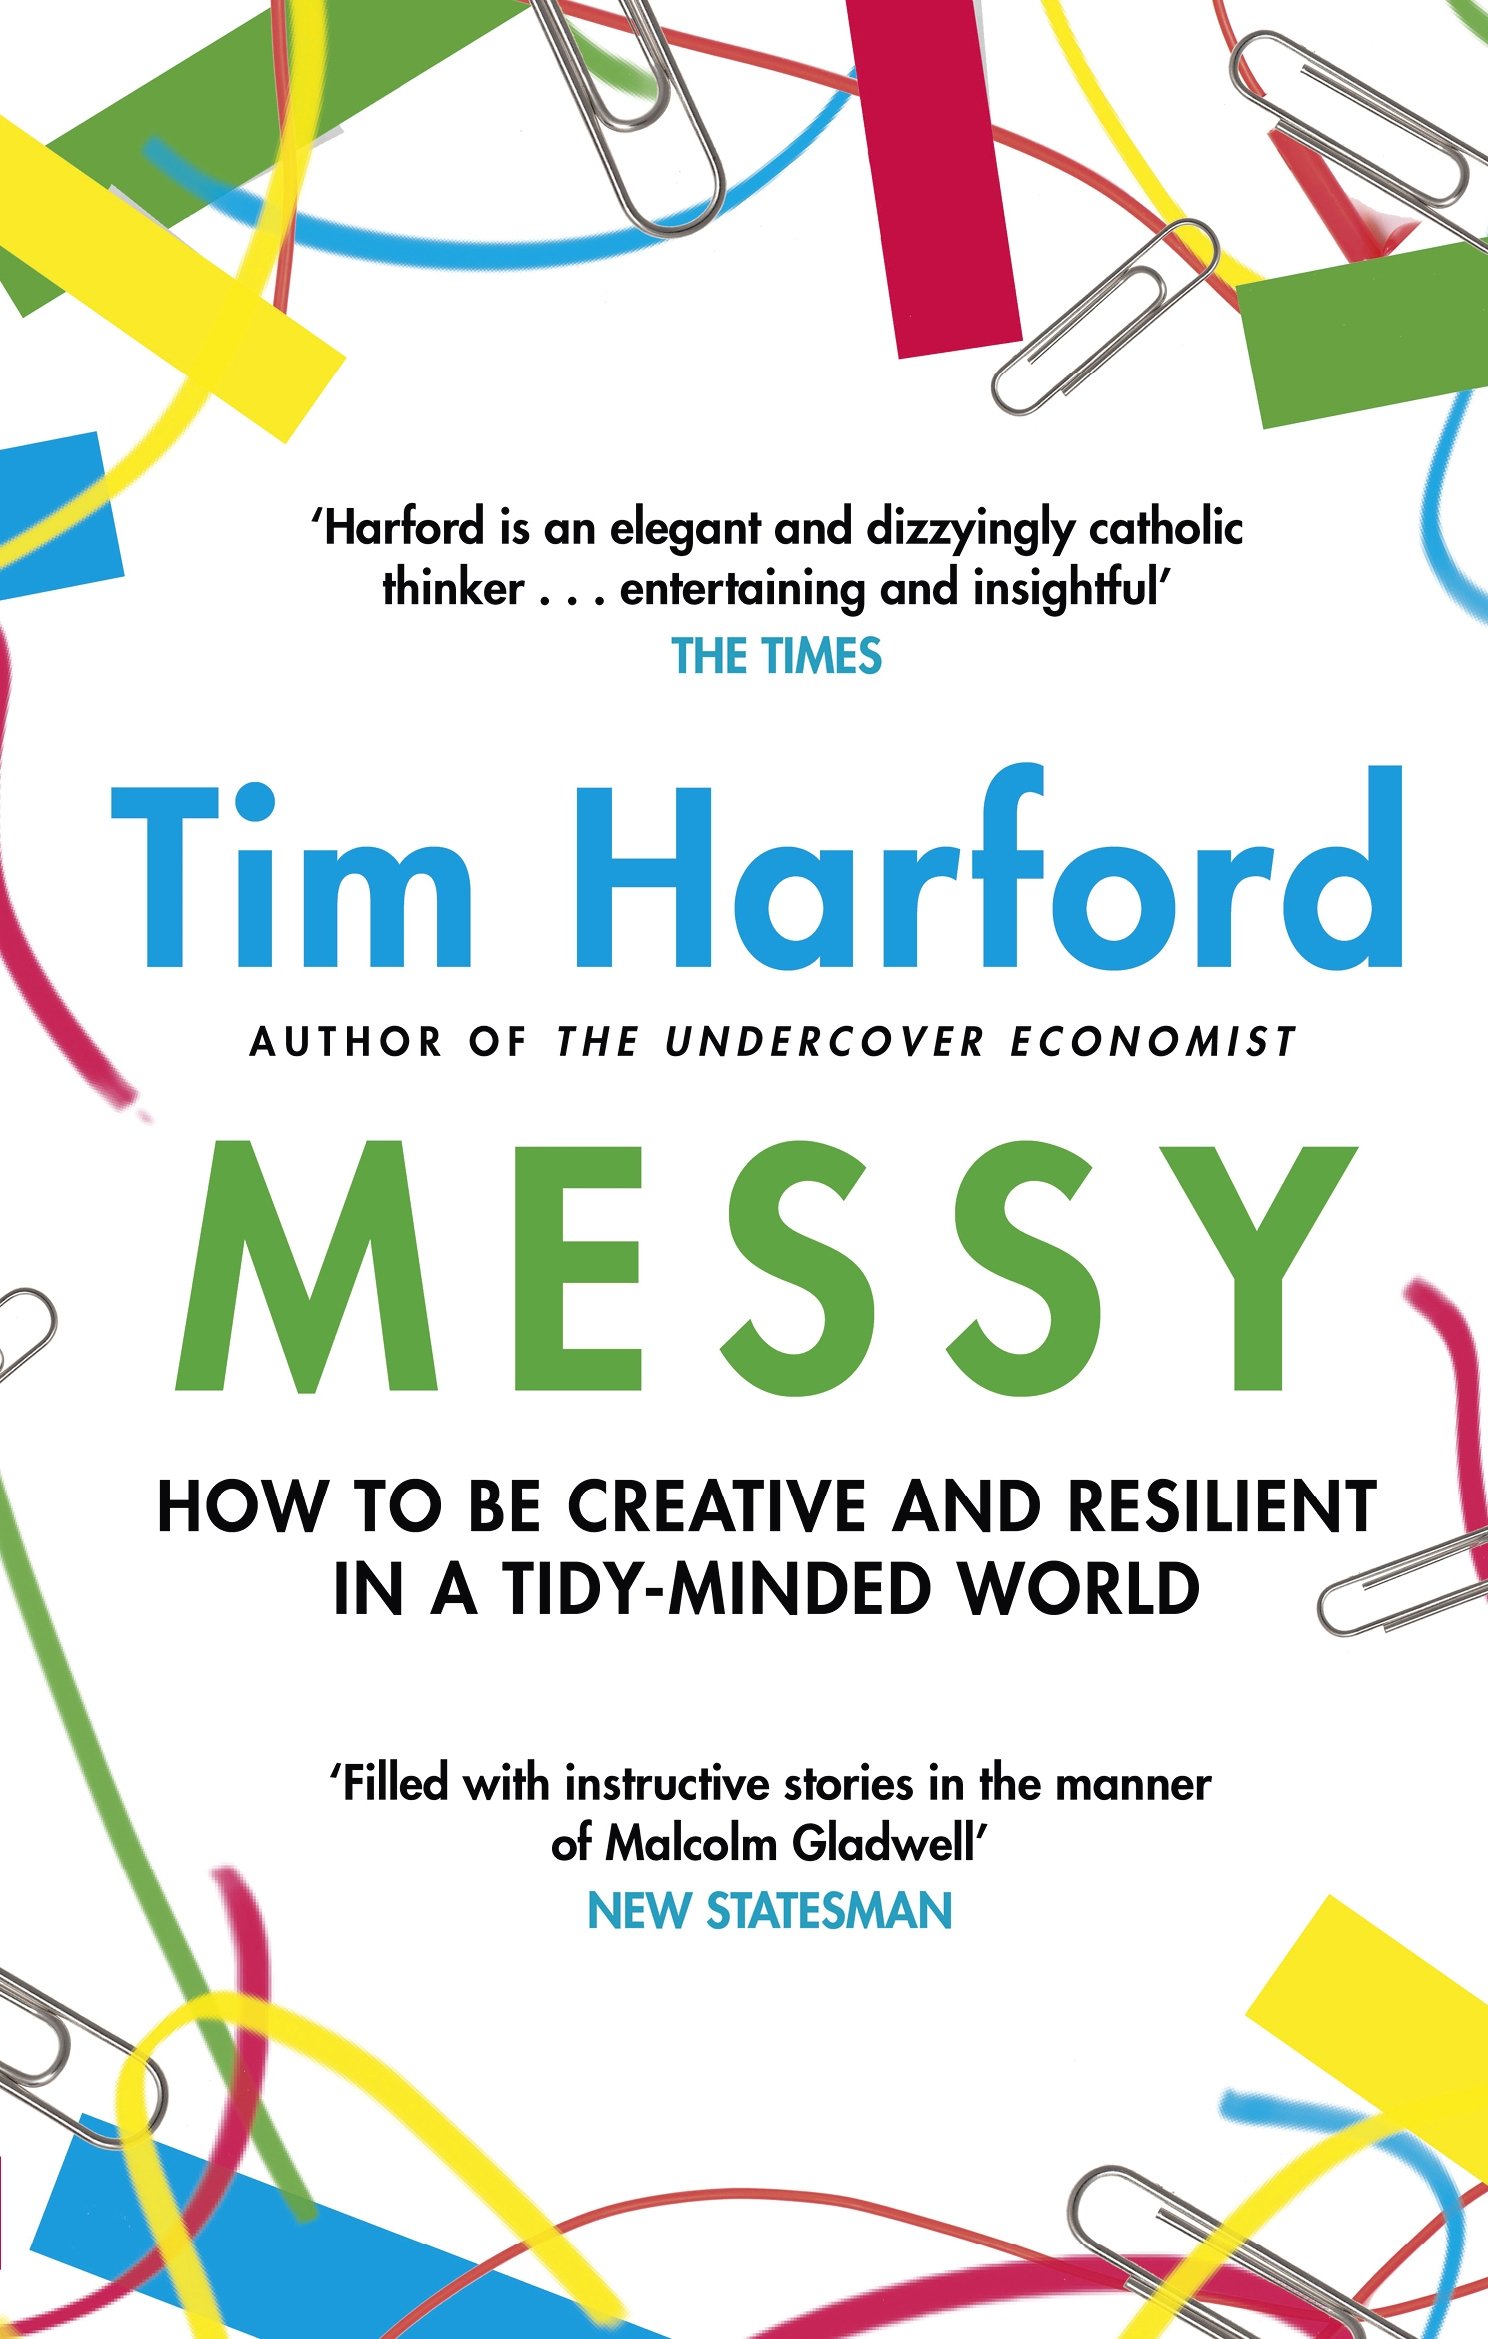 Messy - How to Be Creative and Resilient in a Tidy-Minded World | Tim Harford